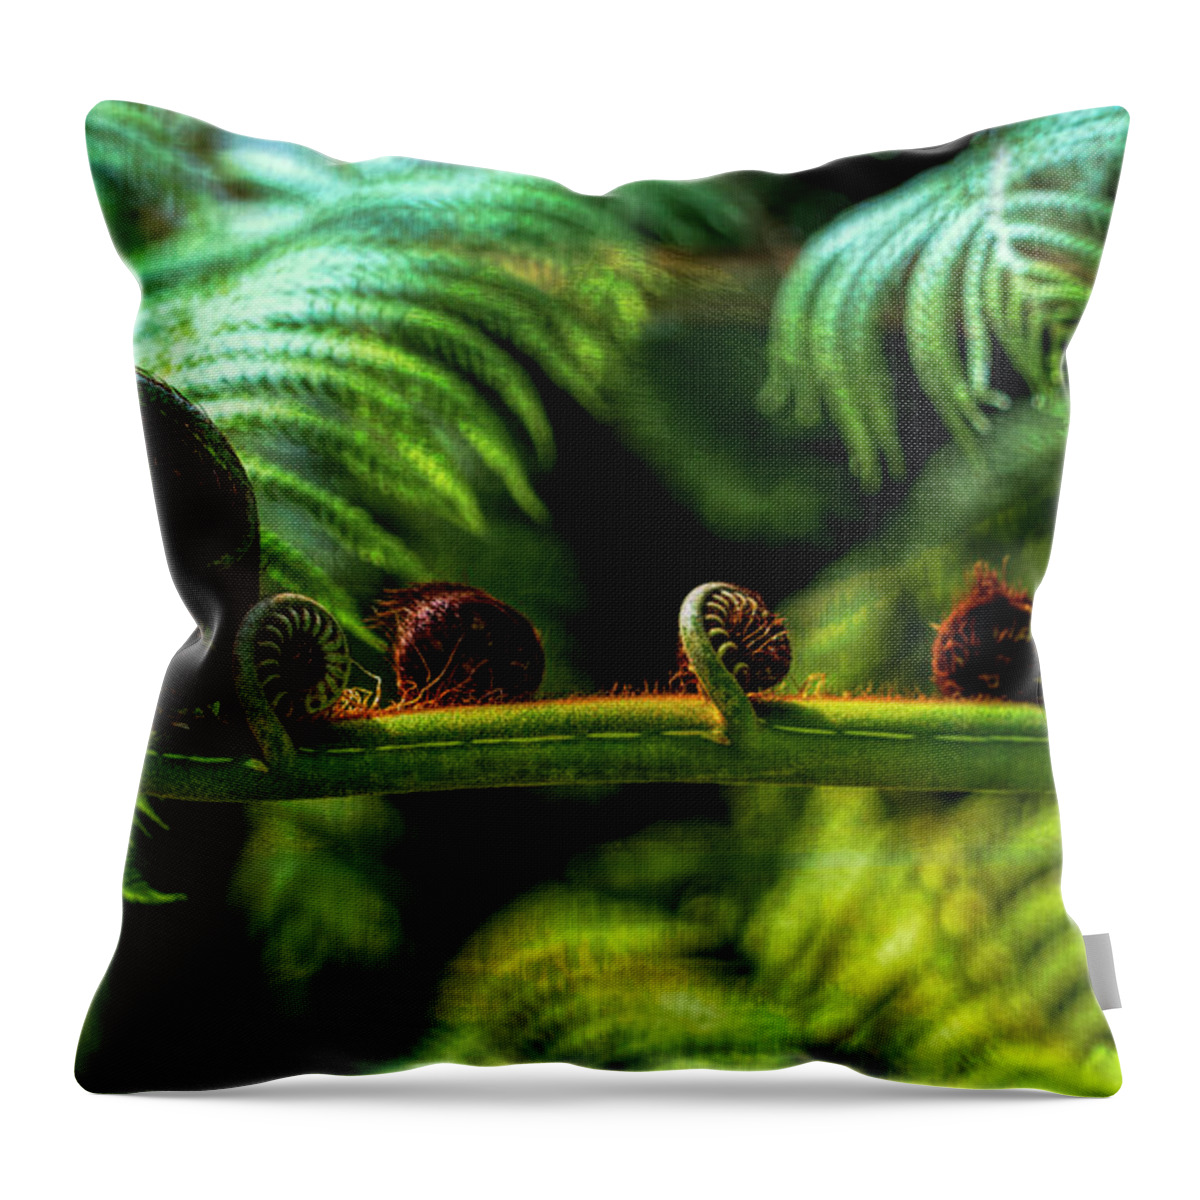 Fern Throw Pillow featuring the photograph Fern Fronds Two by Michael Hope